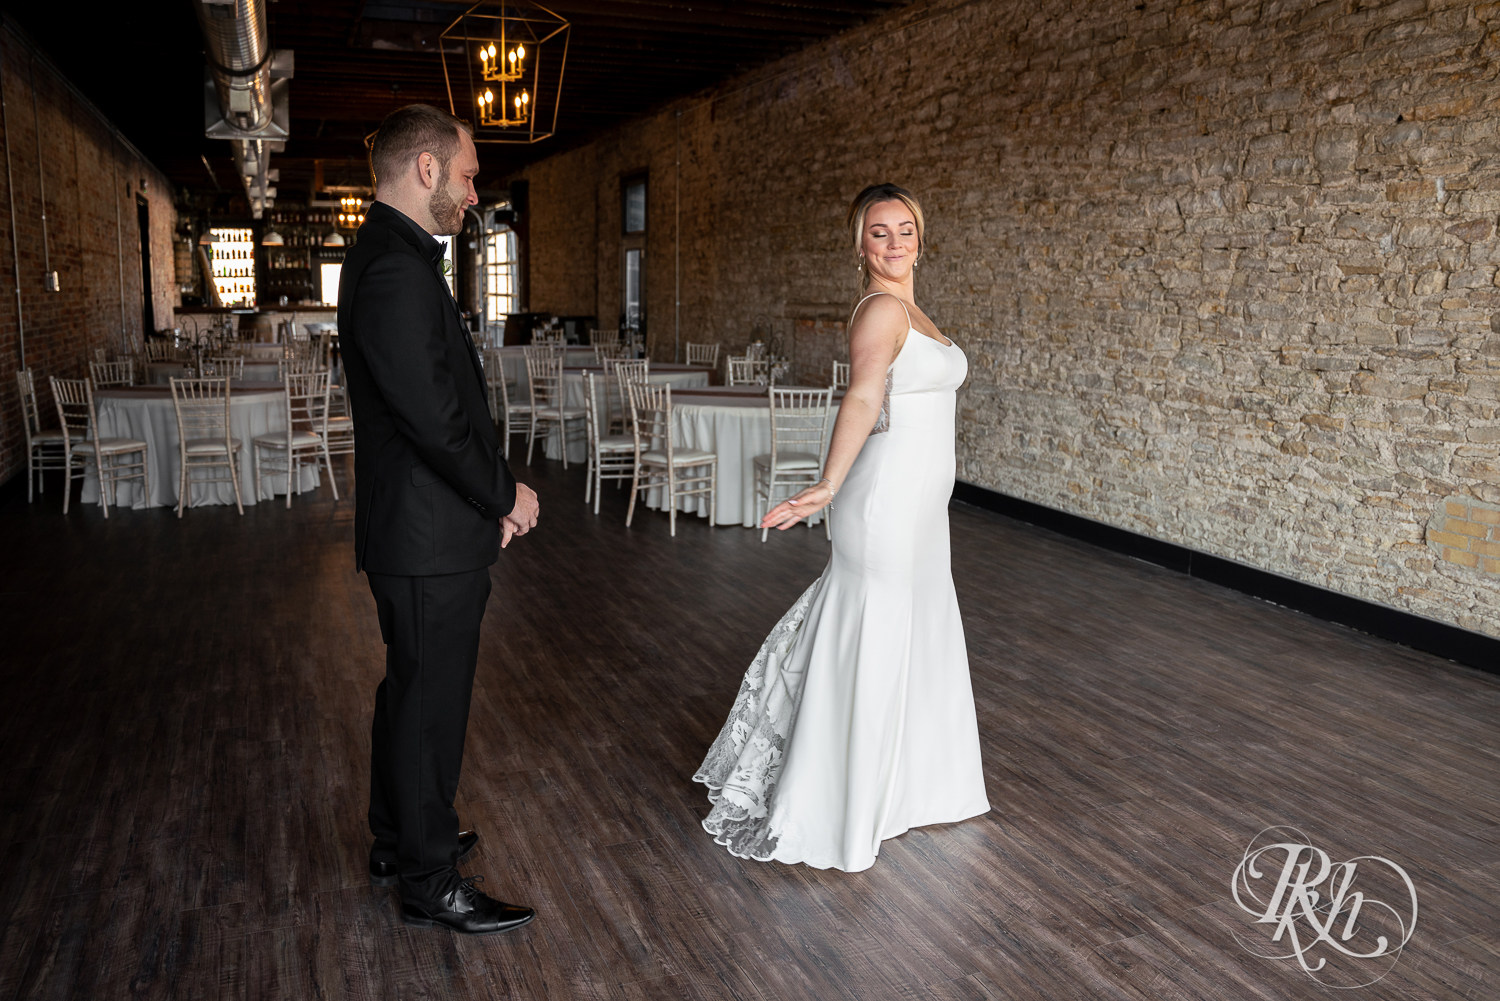 Groom cries during first look at the 3 Ten Event Center in Faribault, Minnesota.